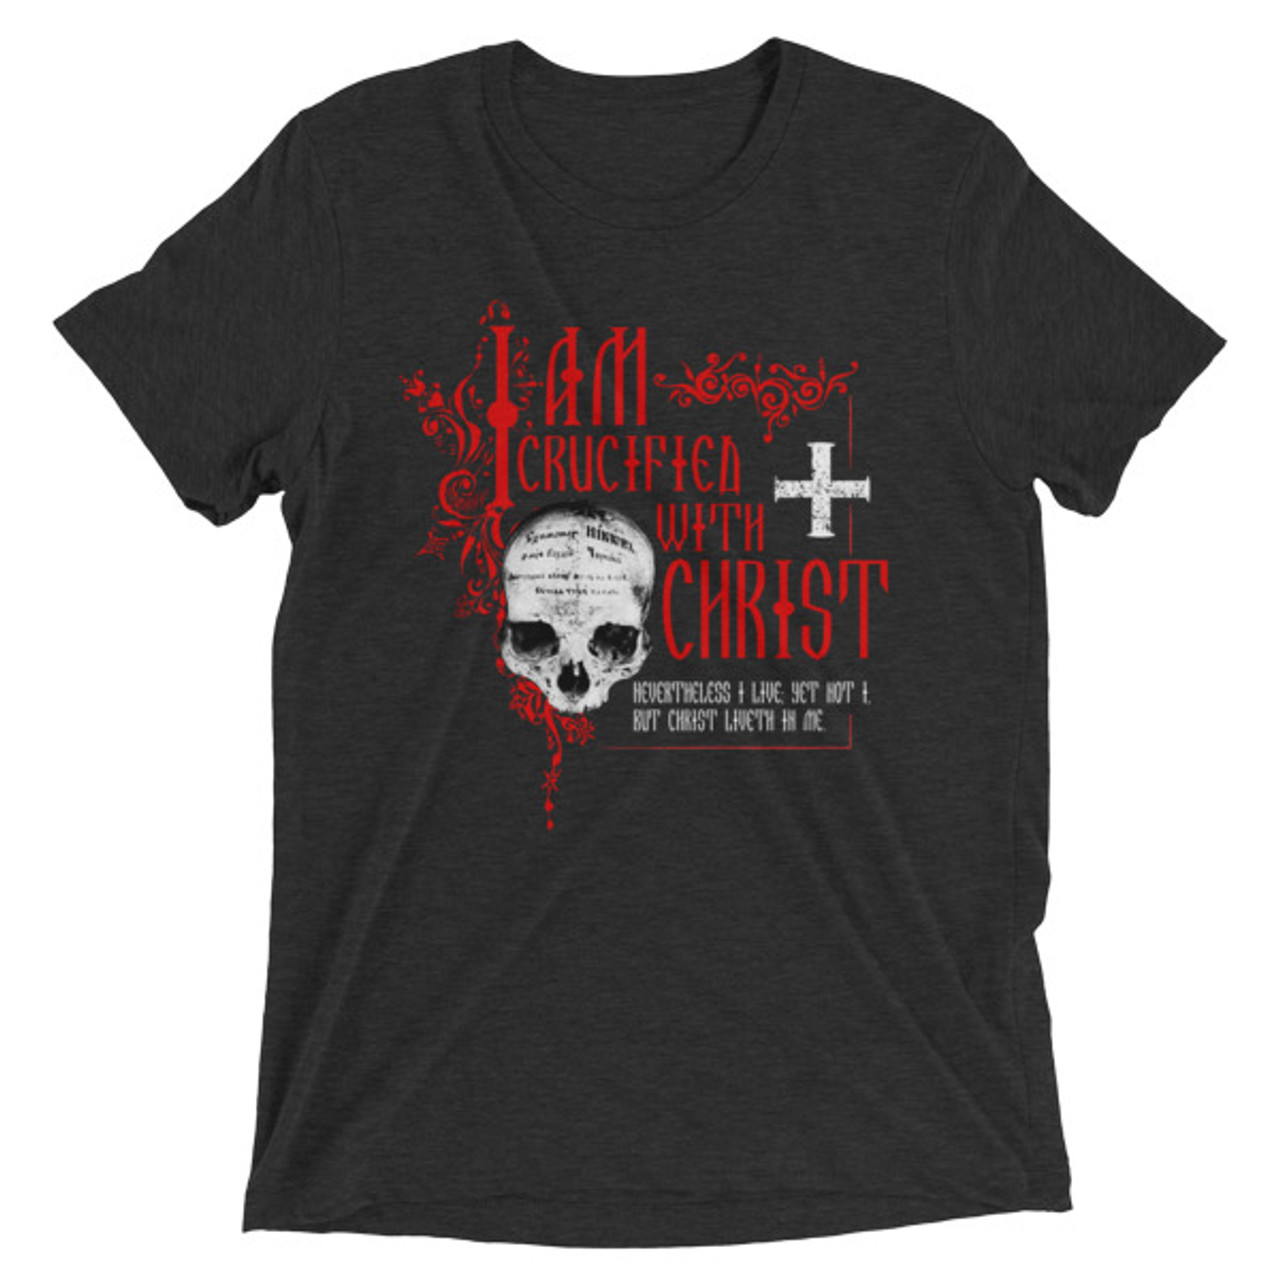 Crucified with Christ Women's T-shirt - Uncut Mountain Supply